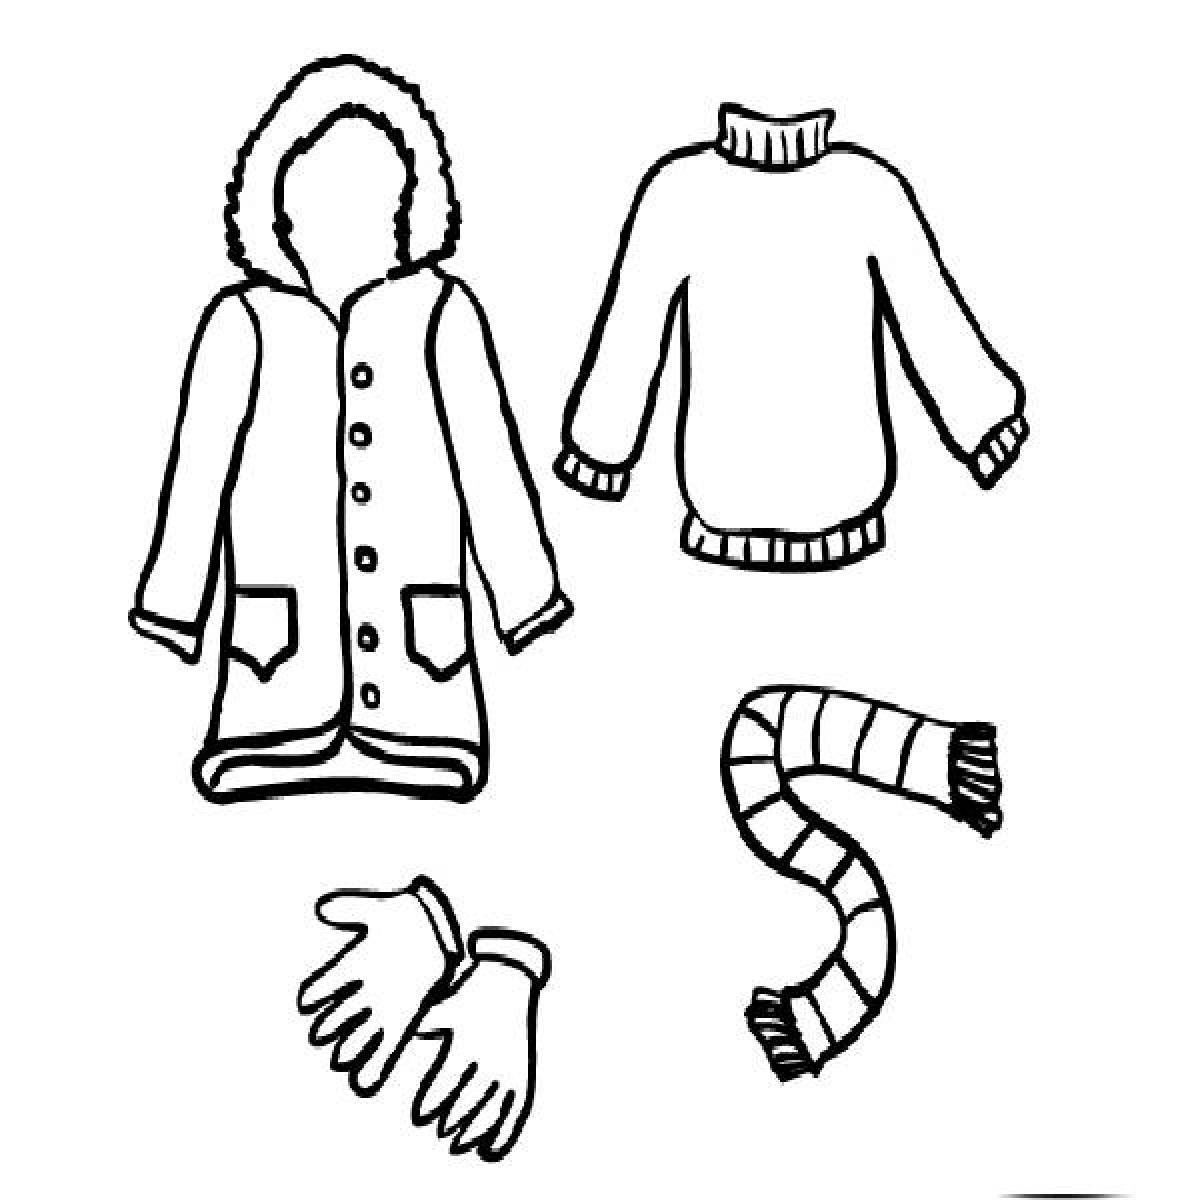 Crazy clothes coloring book for 3-4 year olds